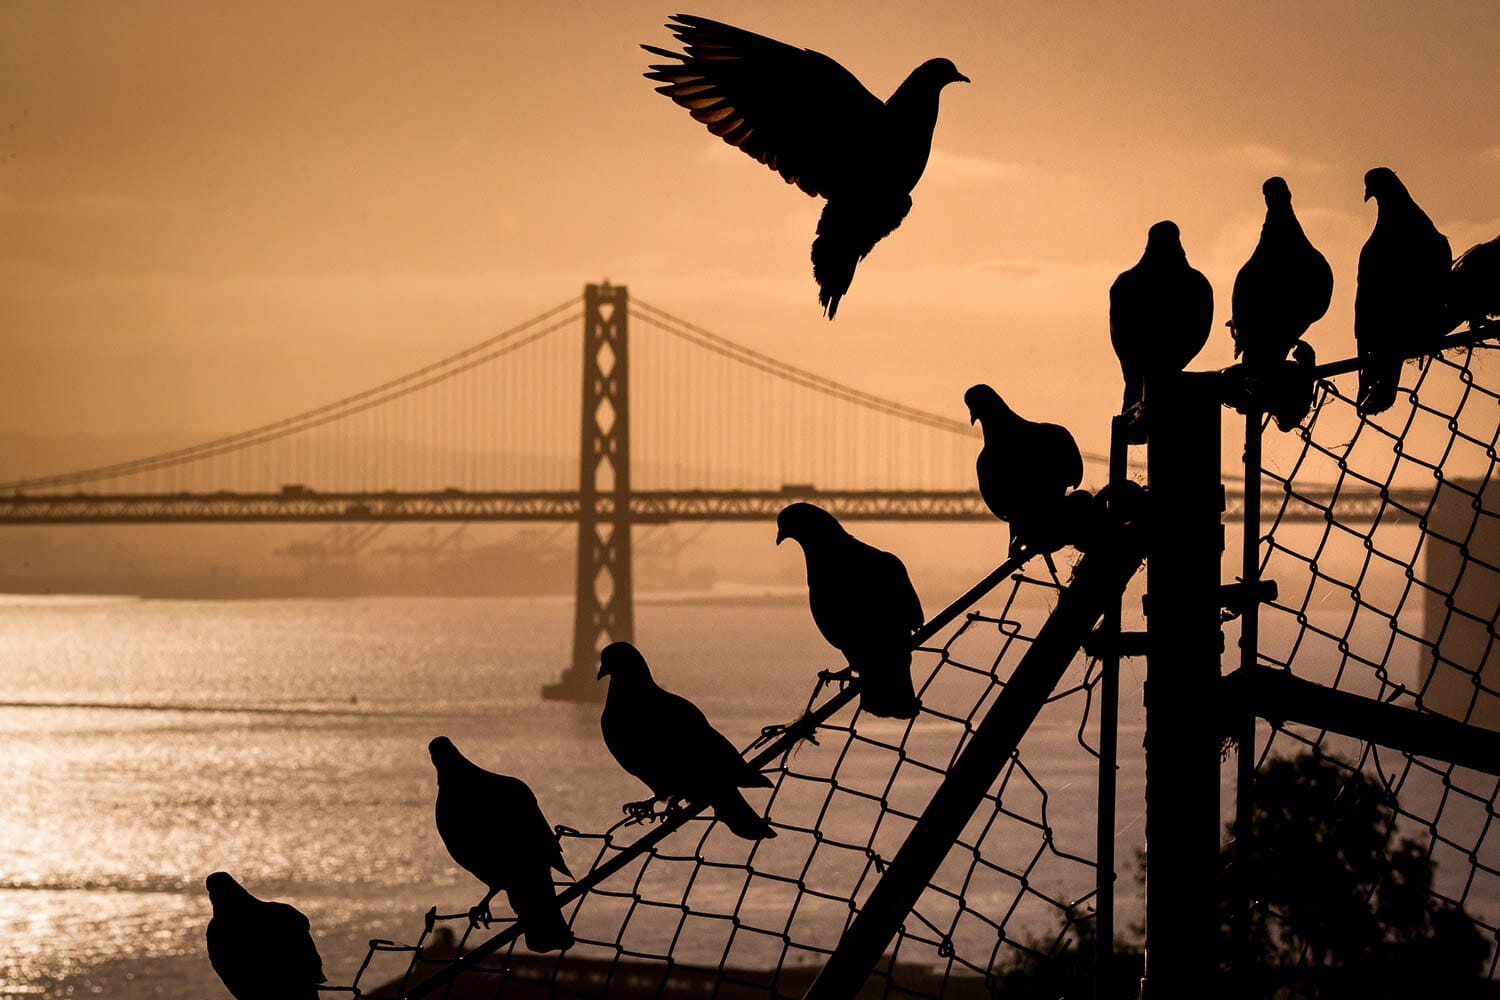 Pigeons perched on a fence at sunset, with a silhouette of a suspension bridge in the background.